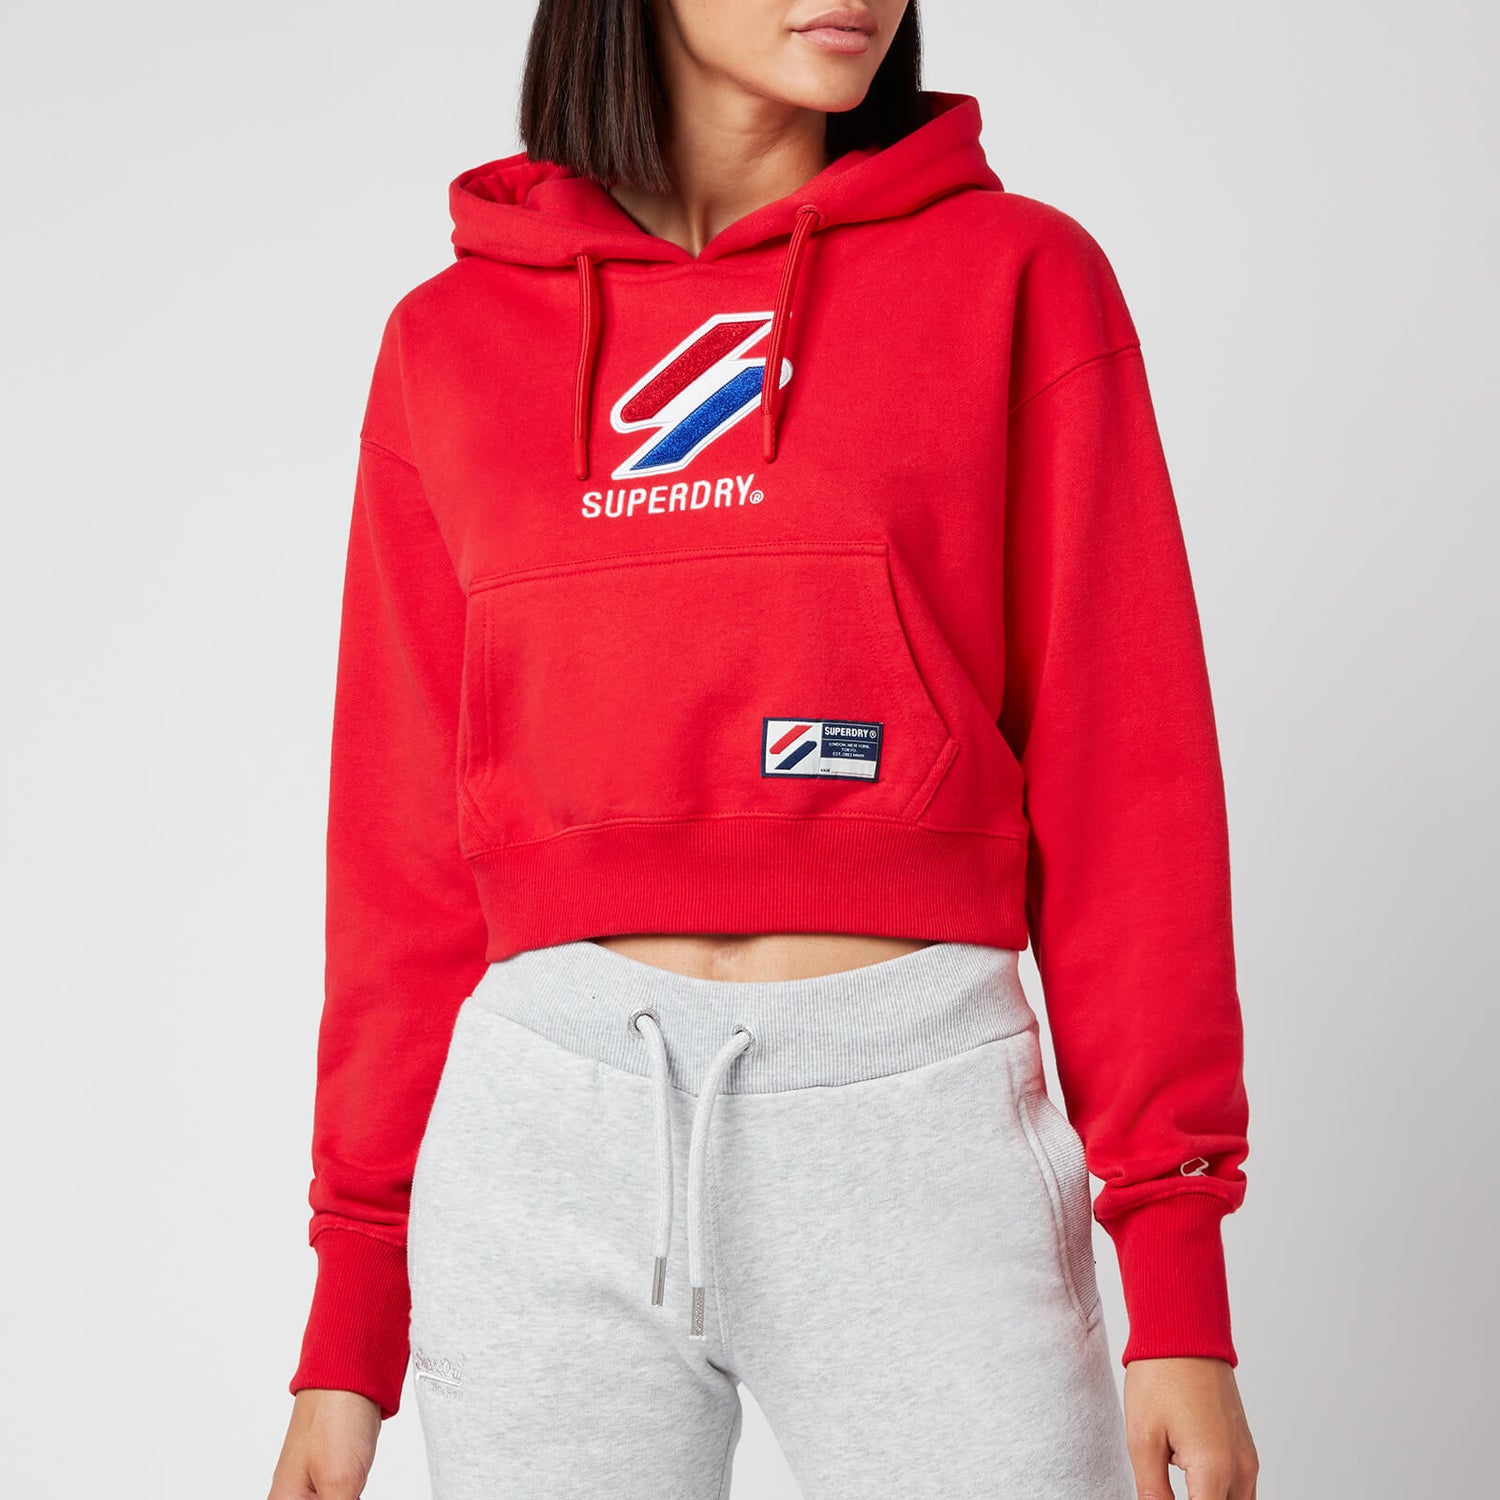 Superdry Women's Sportstyle Classic Boxy Hoodie - Risk Red